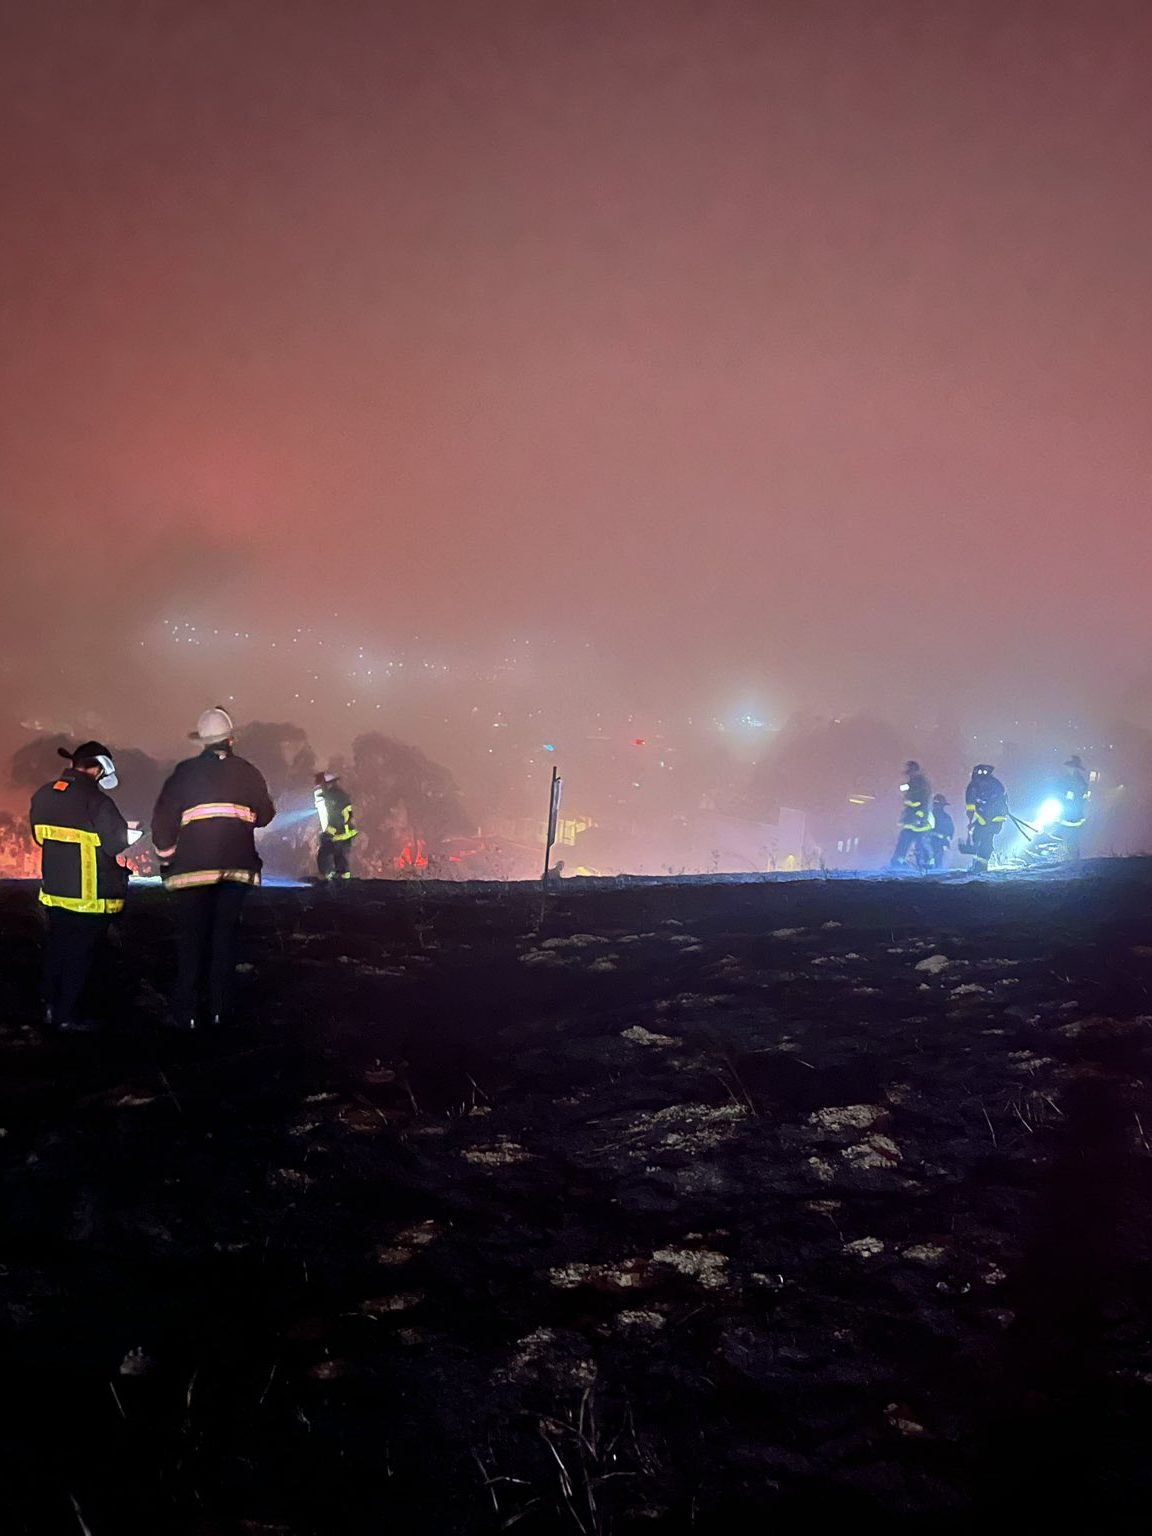 Under heavy nighttime fog, several firefighters use flashlights and tools to check a grassy park area burned by fire using flashlights and tools for hot spots.